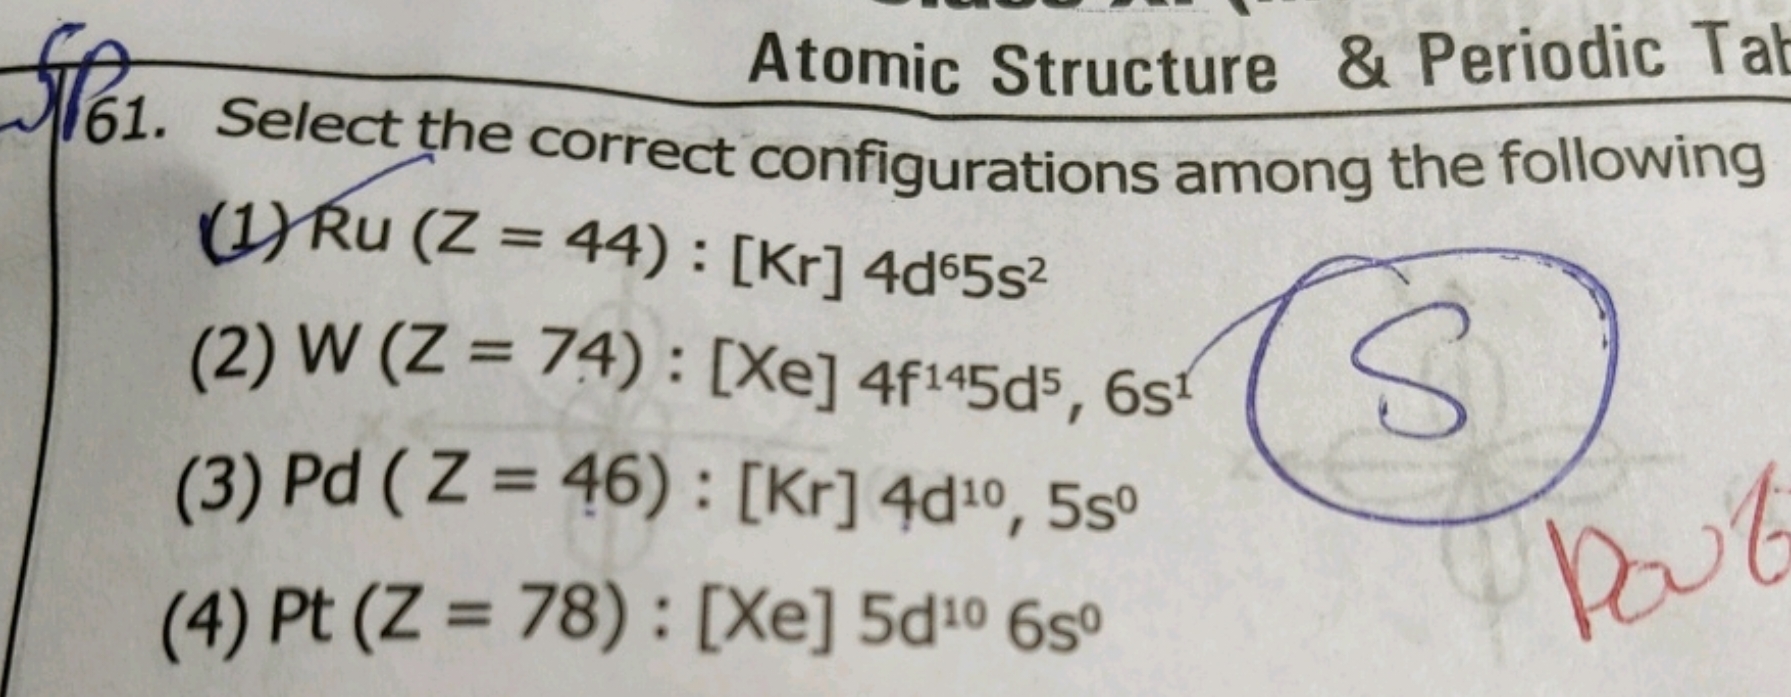 Atomic Structure \& Periodic Tal 61. Select the correct configurations